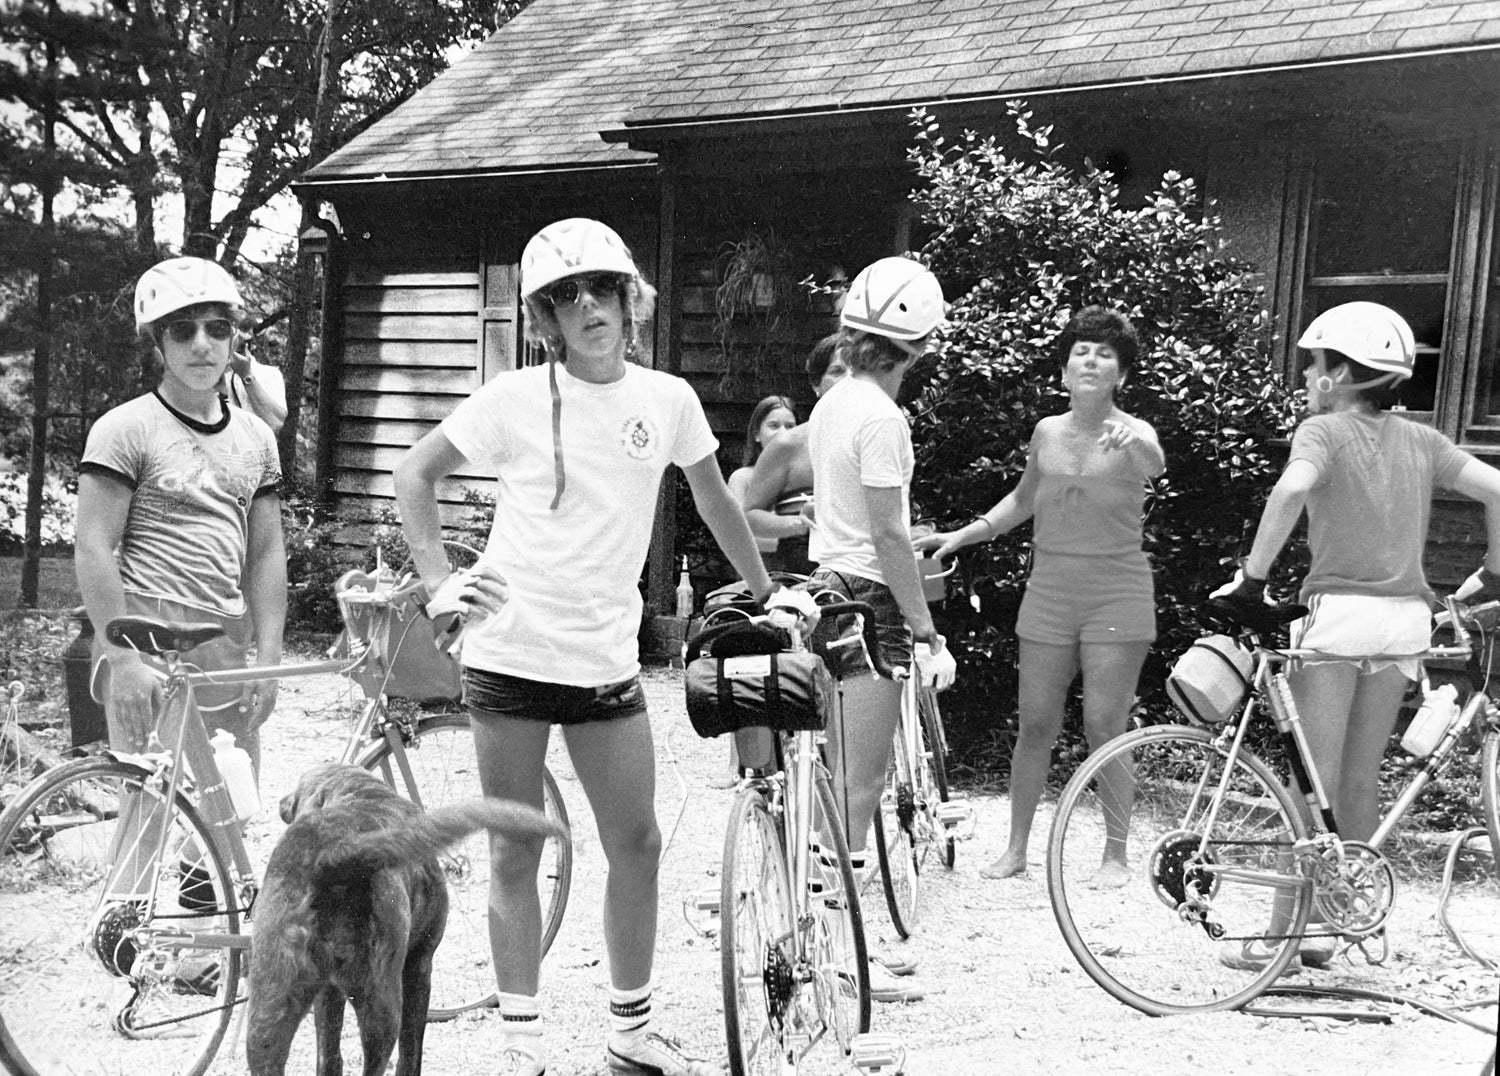 A black-and-white image of the founder and his friends with their bicycles as teenagers.